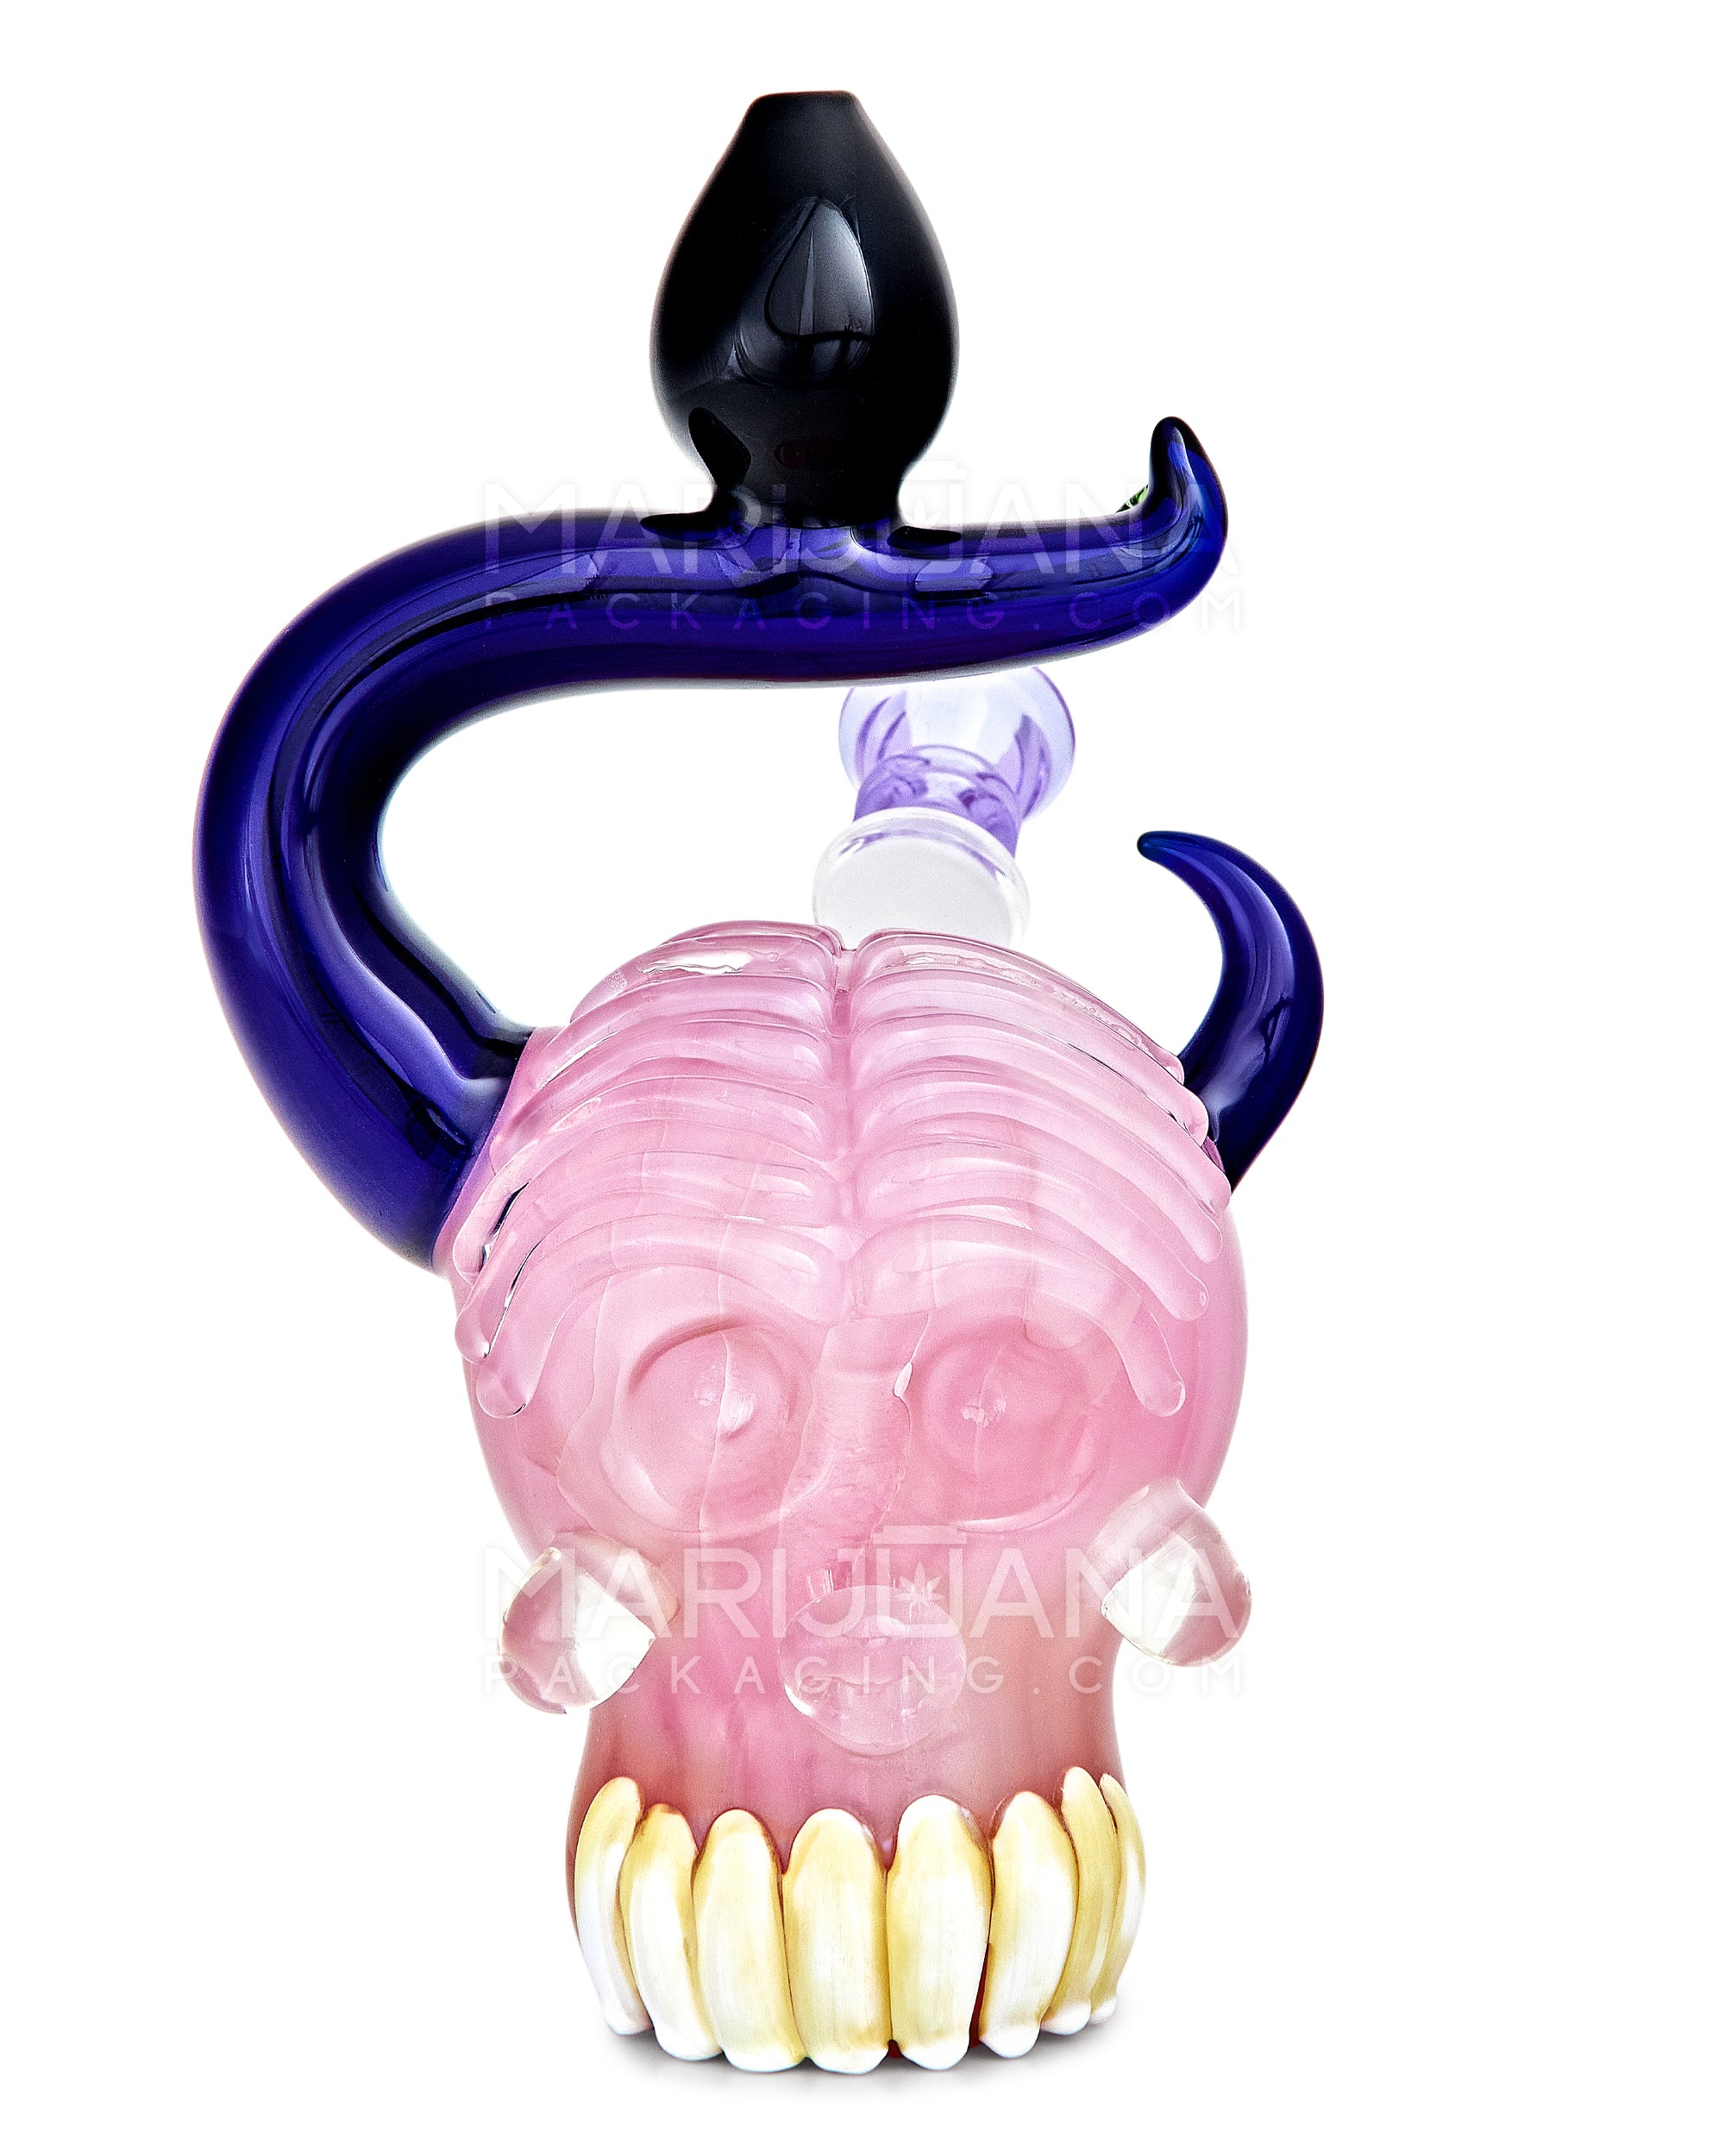 Heady | Lantern Neck Crystal Skull Head Glass Water Pipe w/ Double Knockers | 7.5in Tall - 14mm Bowl - Assorted - 6